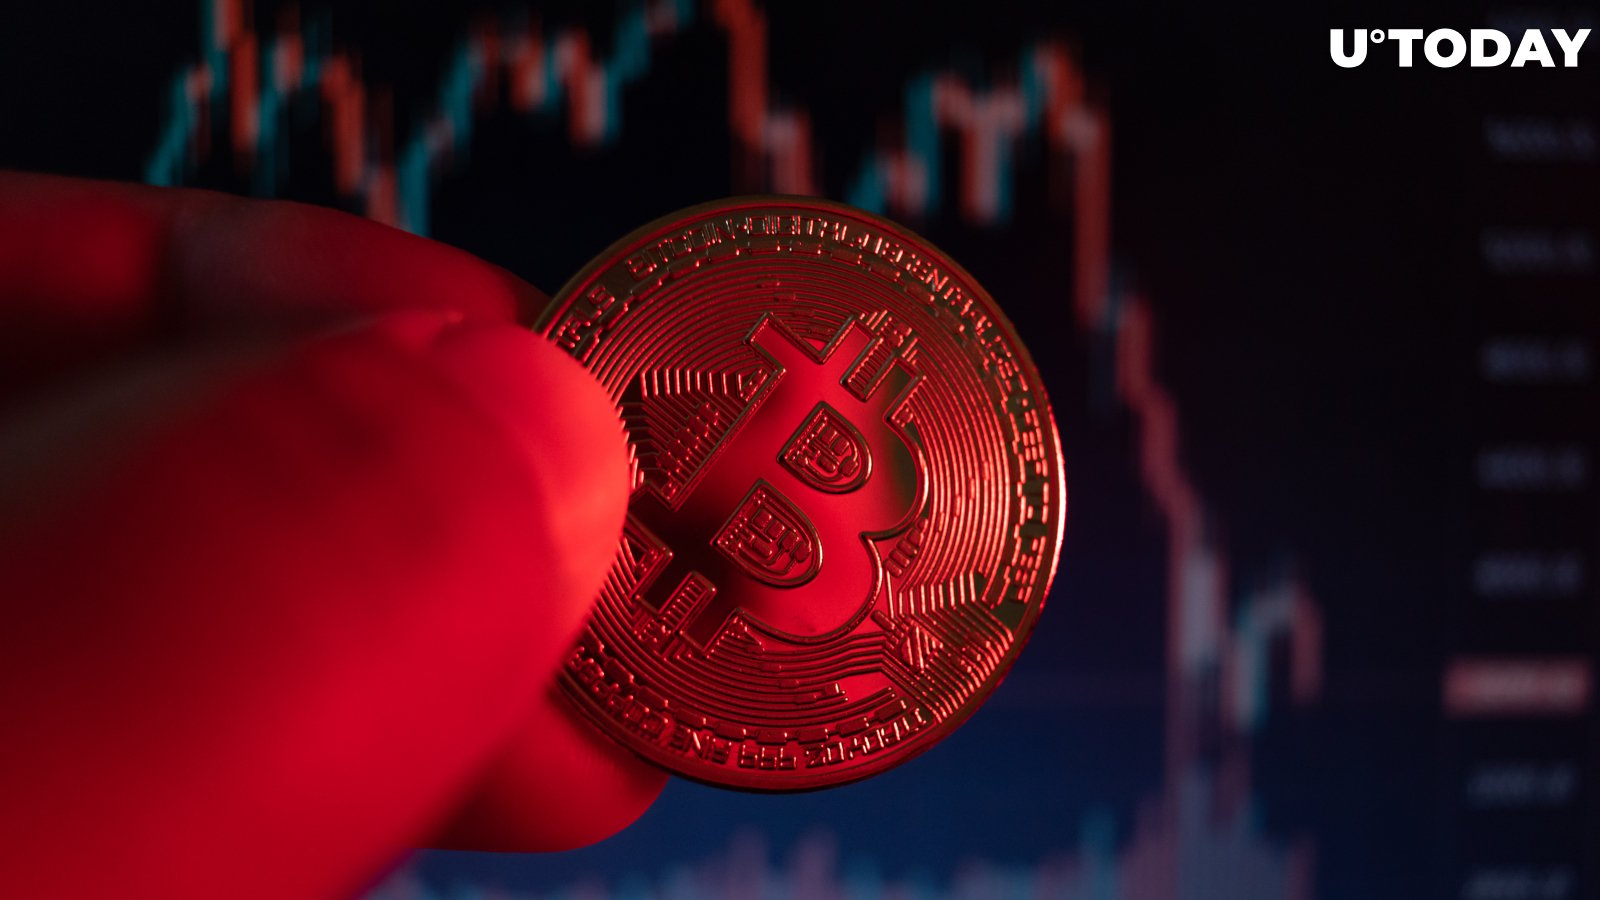 John Bollinger Says Bitcoin Traders Should Be on the Alert 